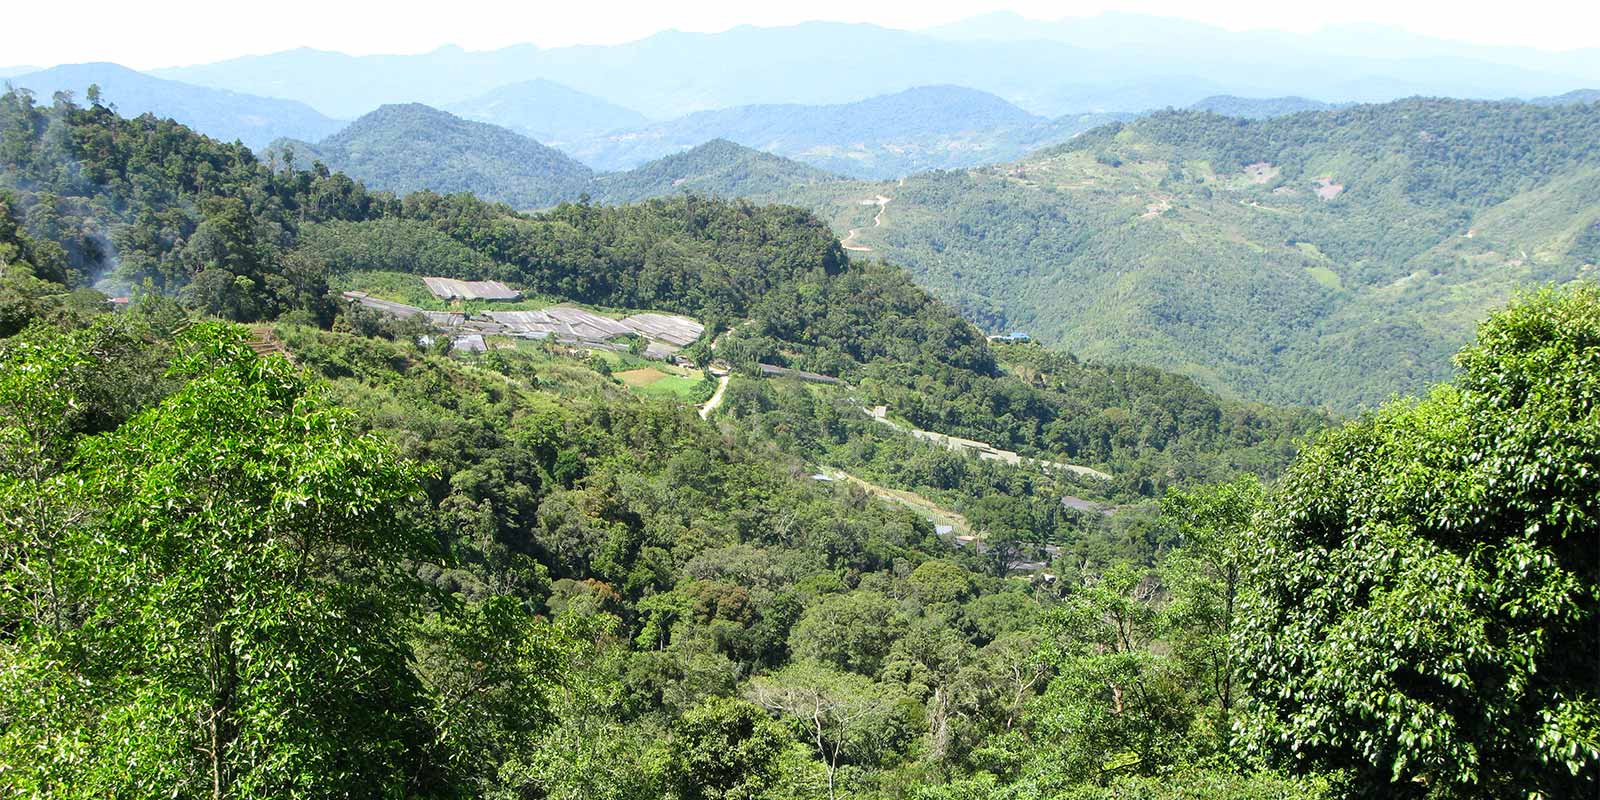 View out over forest and mountain landscape in Kiulu Valley